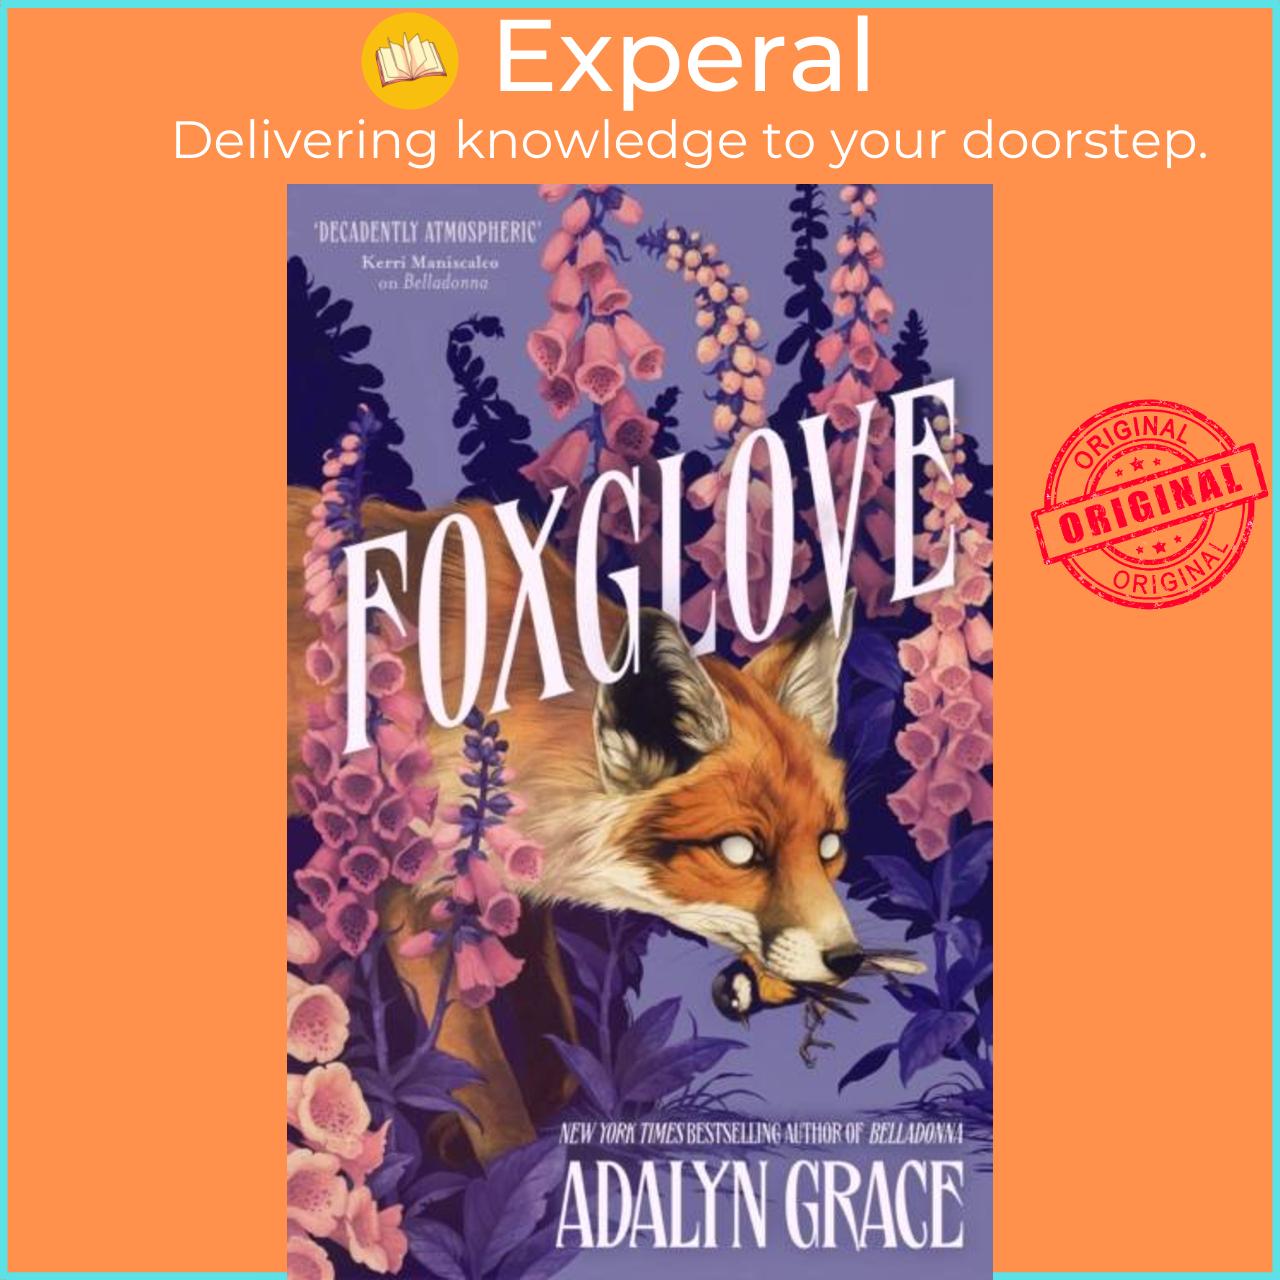 Sách - Foxglove - The thrilling gothic fantasy sequel to Belladonna by Adalyn Grace (UK edition, hardcover)